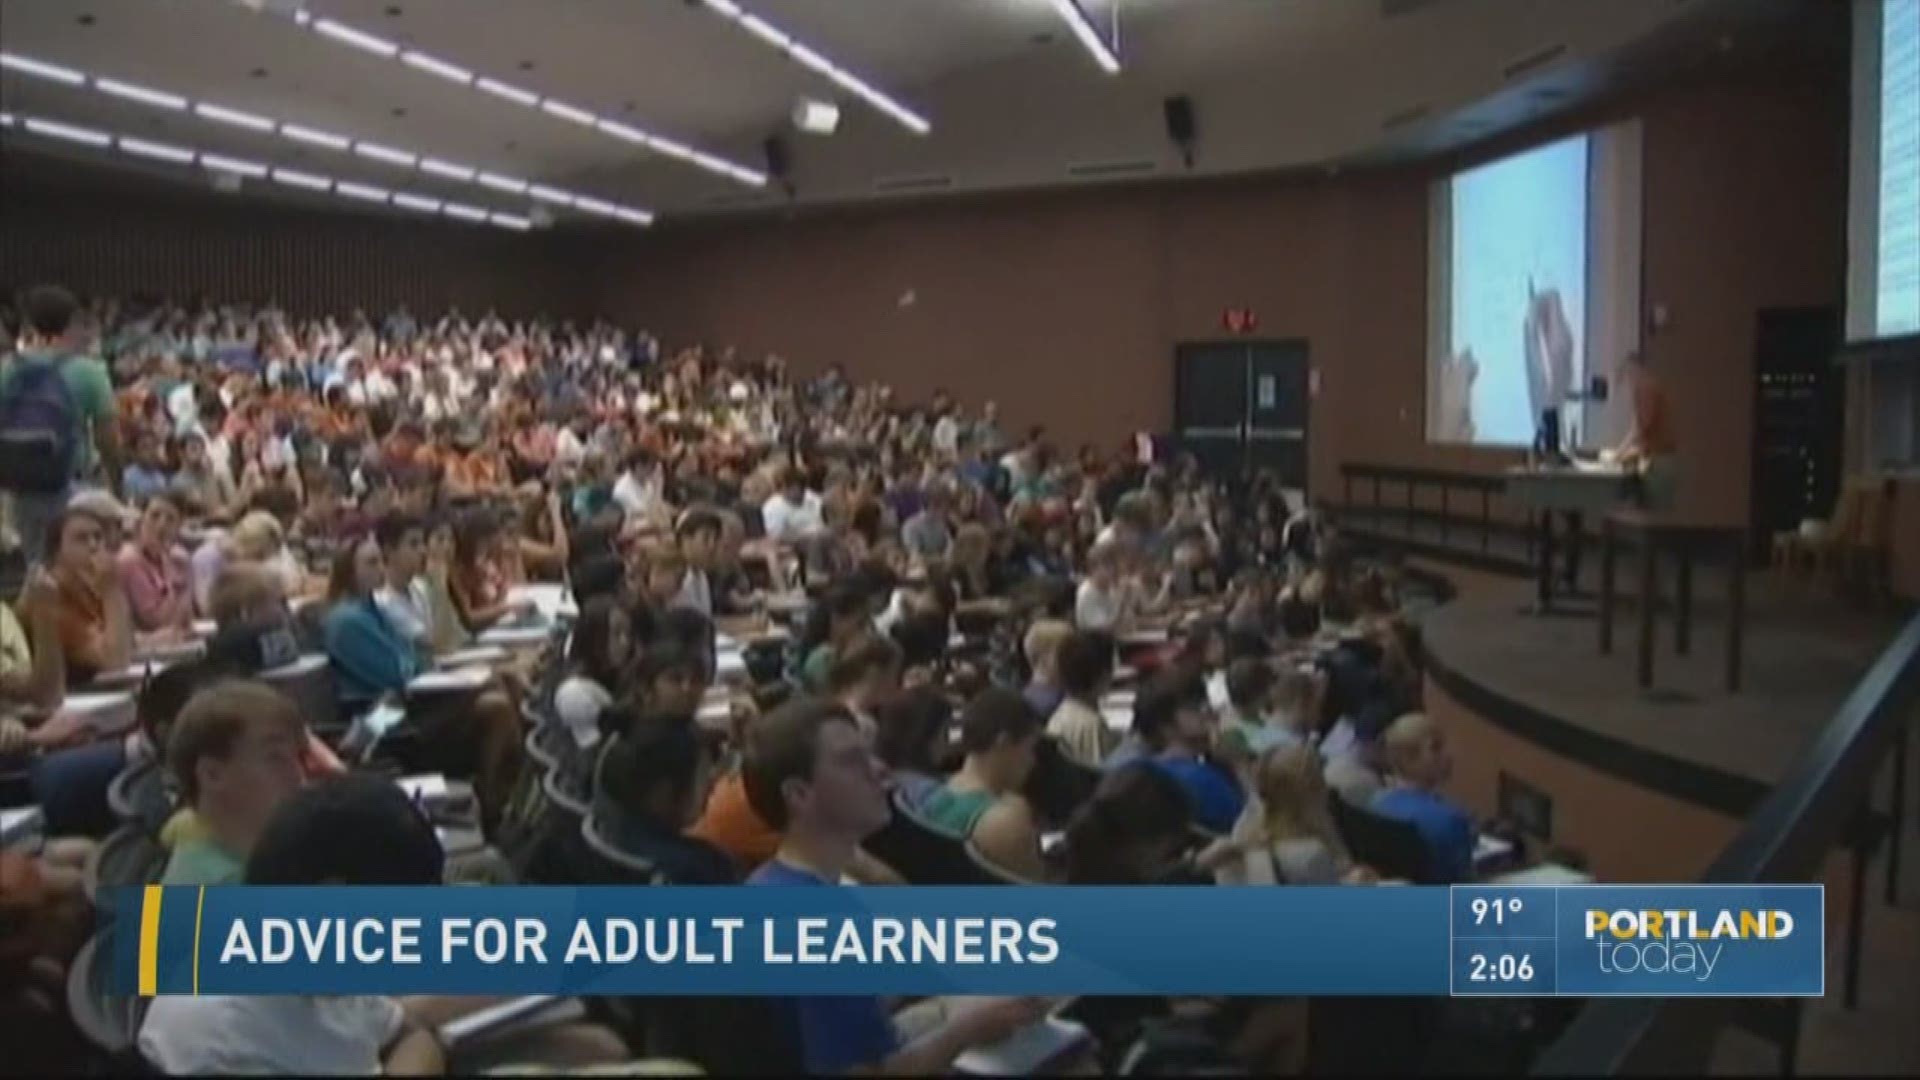 Advice for adult learners